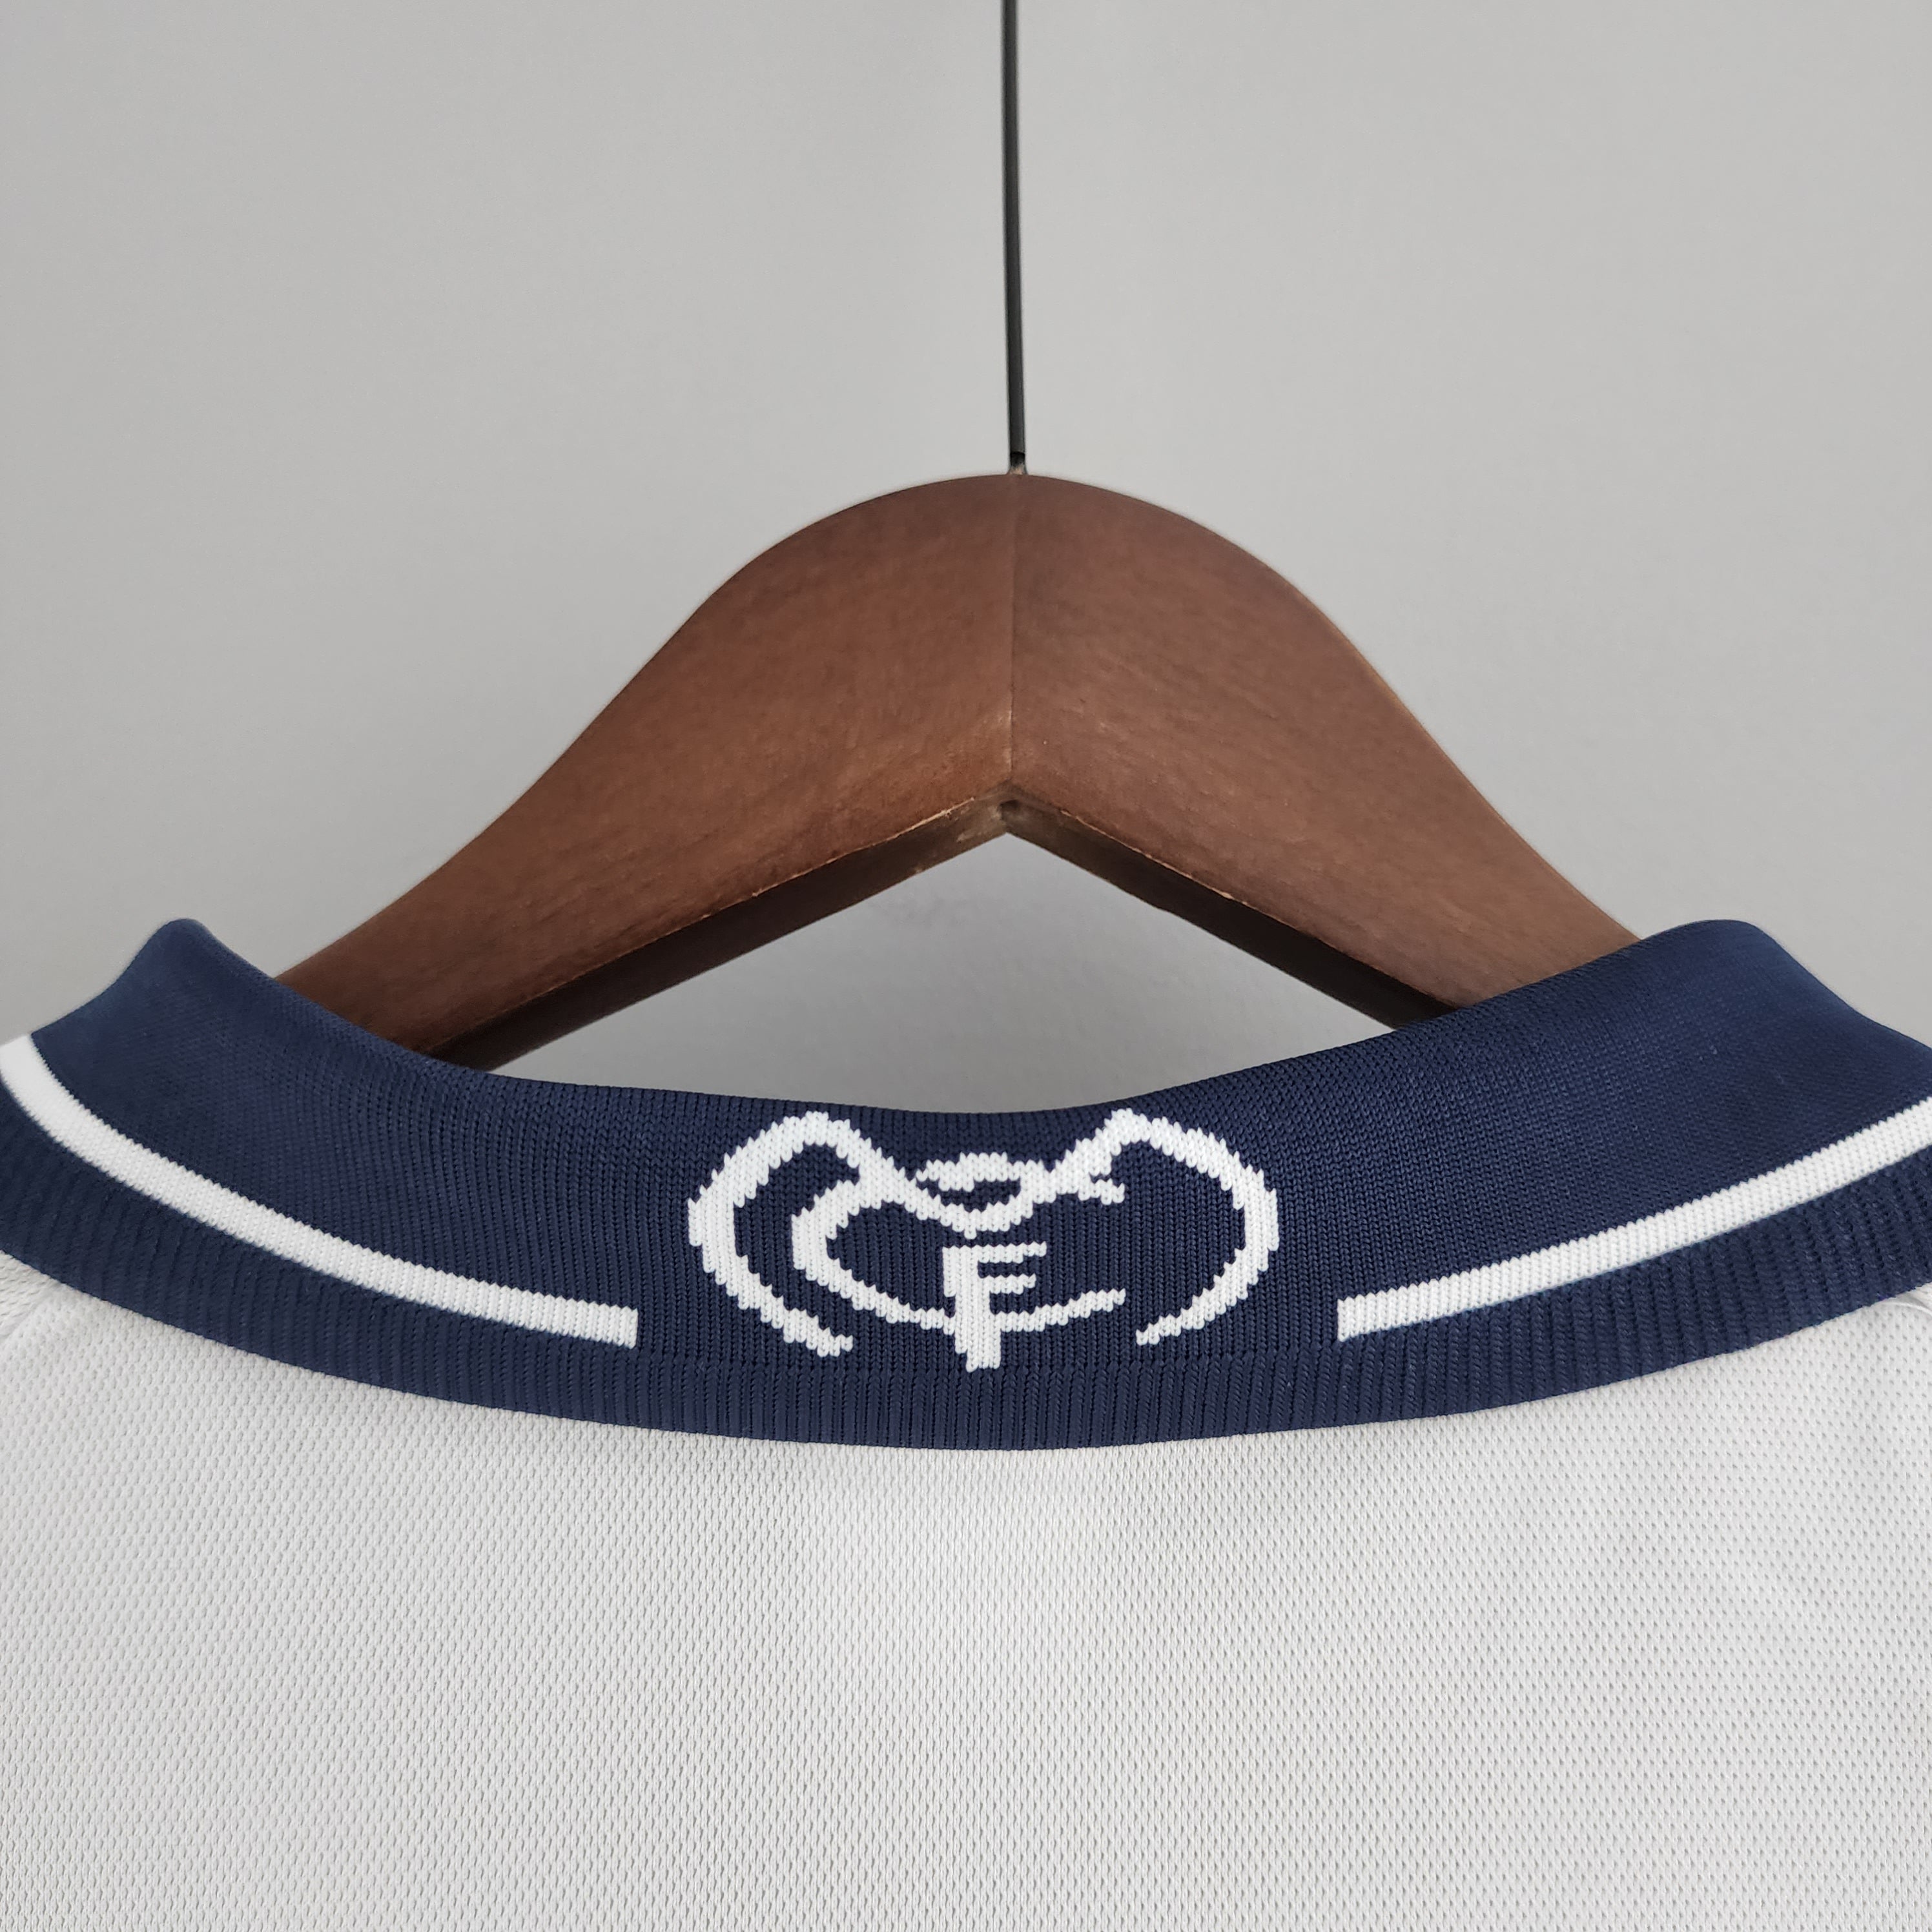 Real Madrid 2000-01 Home Jersey